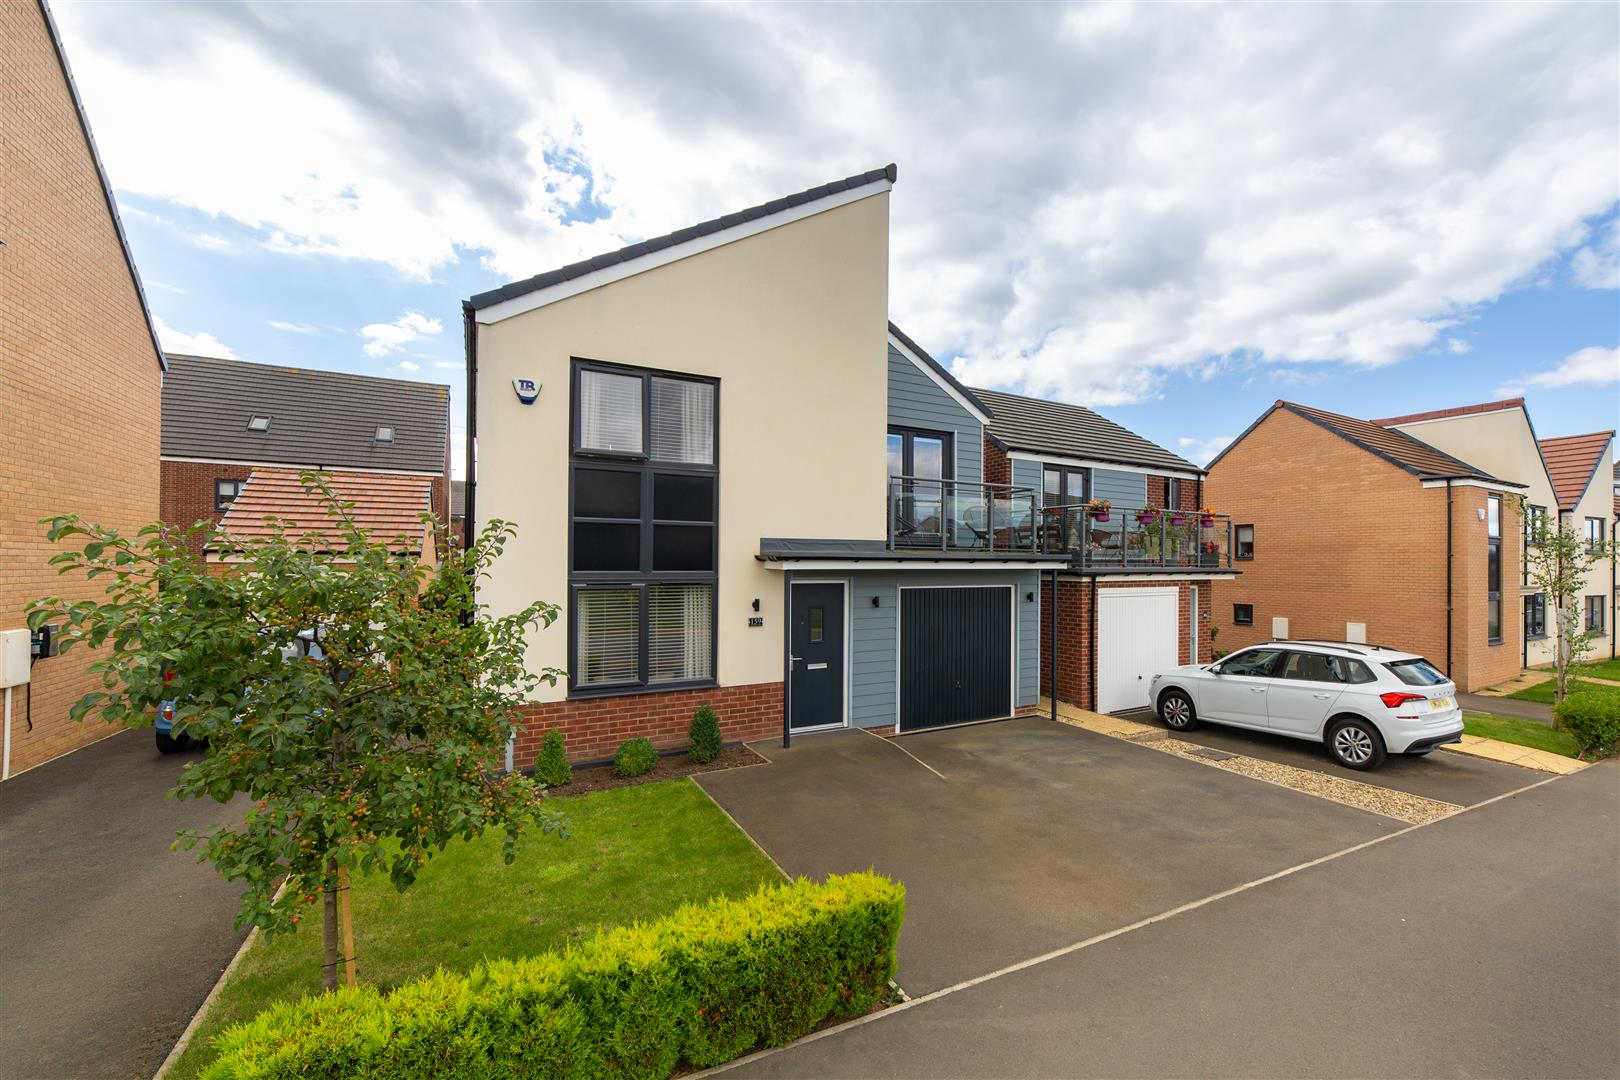 4 bed detached house for sale in Roseden Way, Great Park - Property Image 1